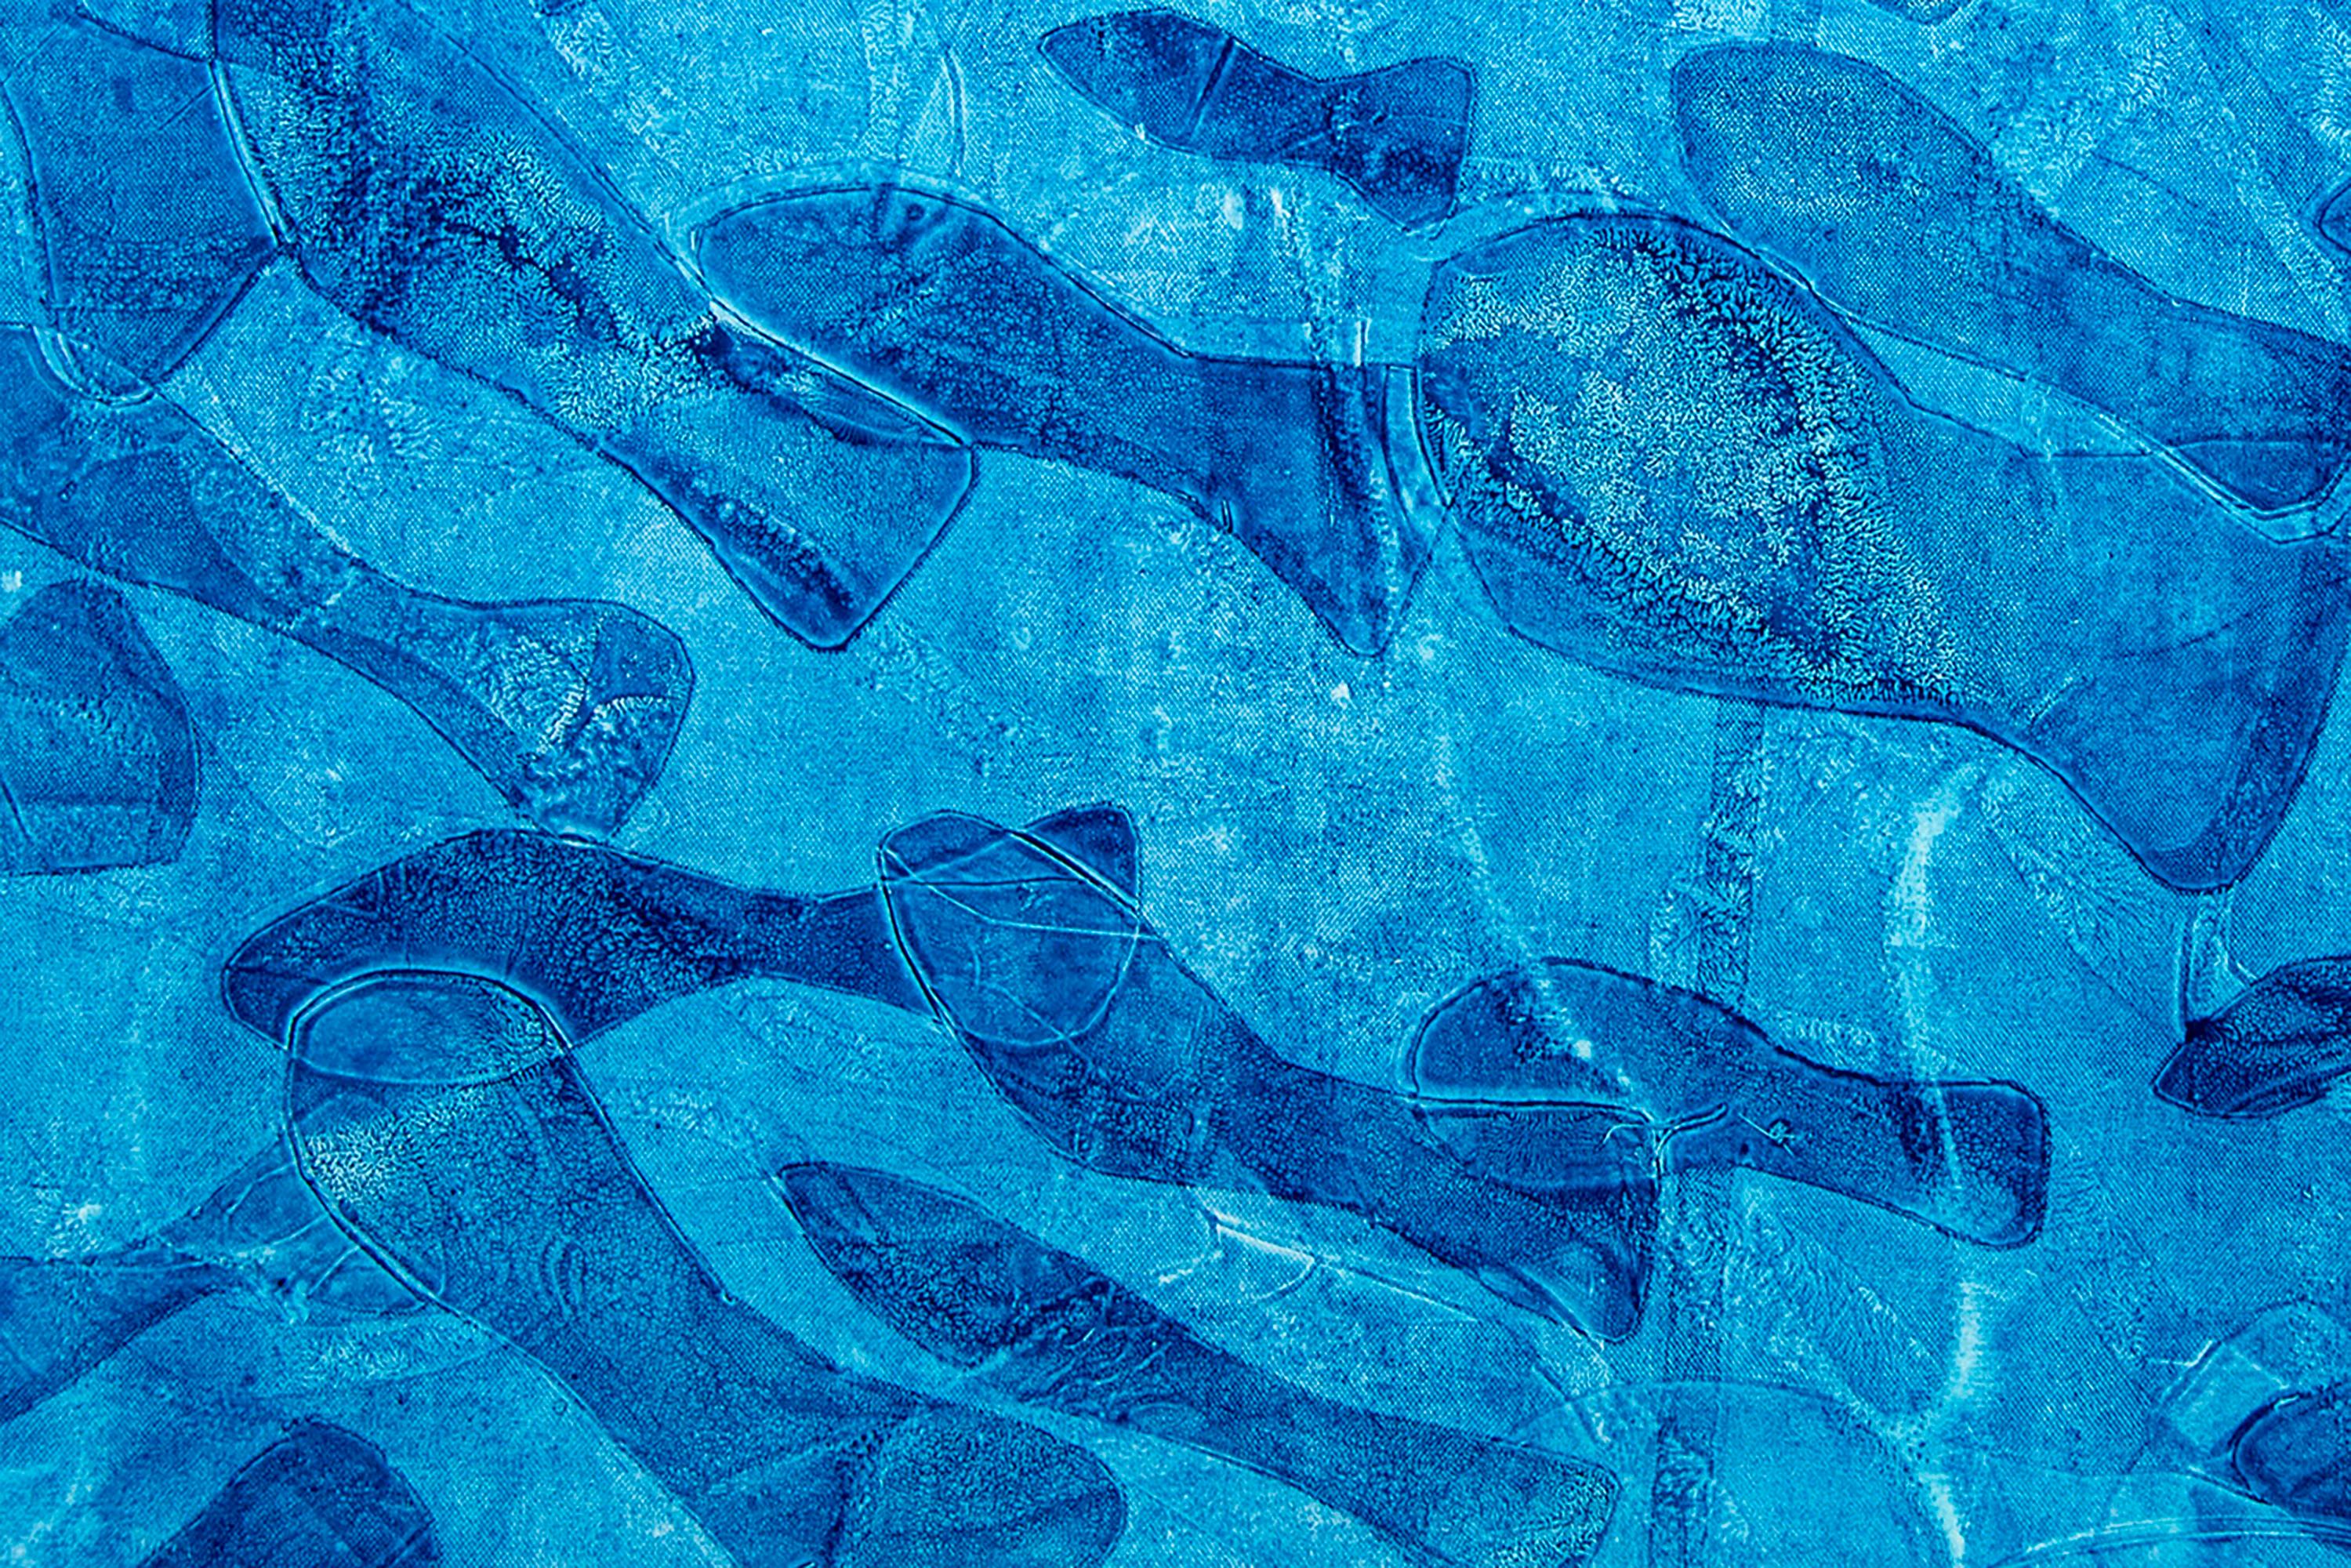 Blue Tones, Abstract Figurative Painting of  Fish Patterns, Seascape on Paper  For Sale 5